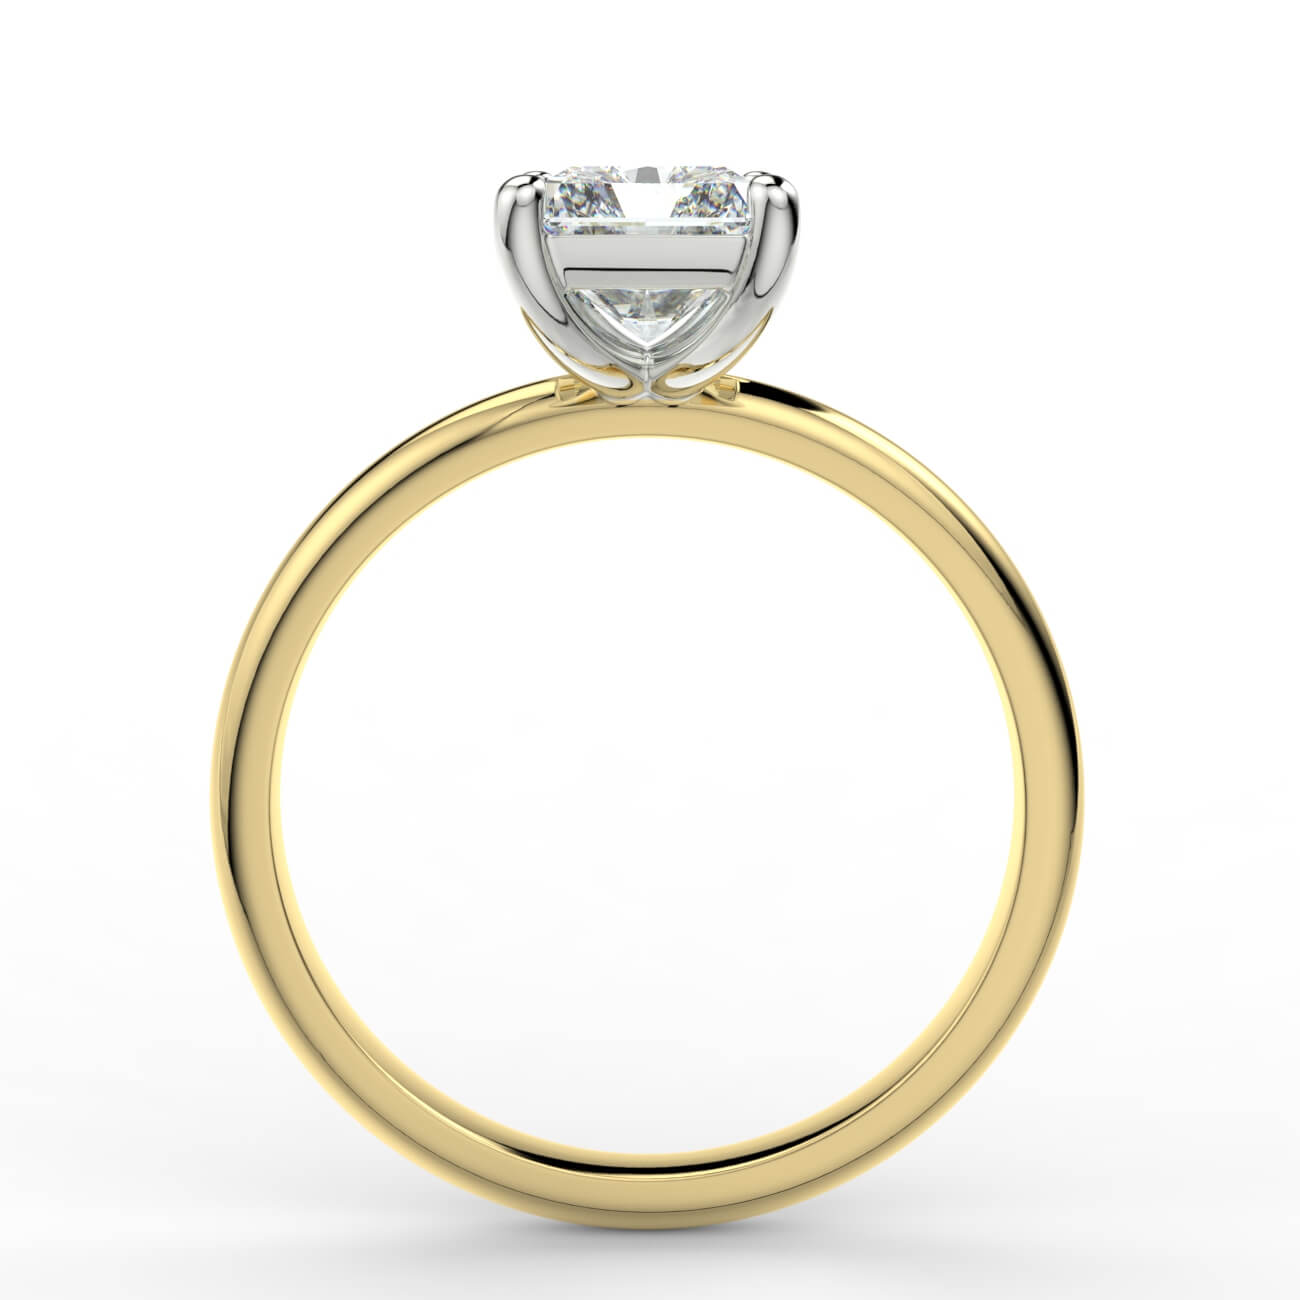 Solitaire radiant cut diamond engagement ring in yellow and white gold – Australian Diamond Network